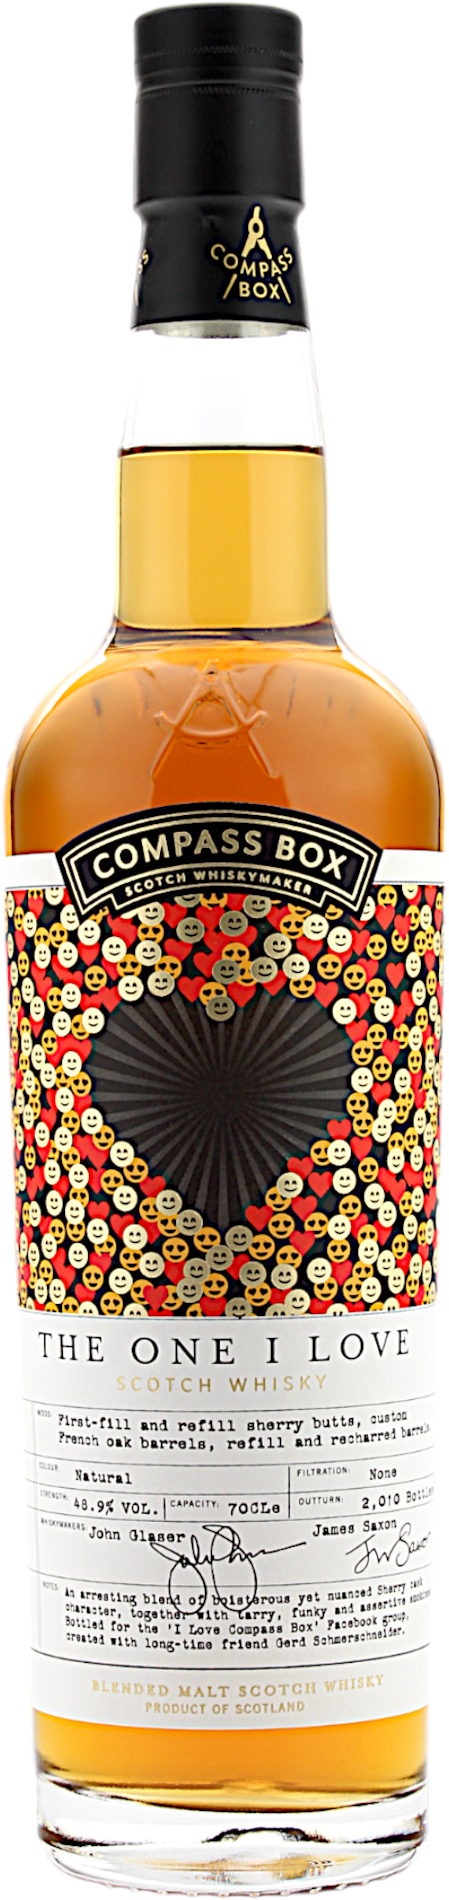 Compass Box The One I Love Limited Edition 48.9% 0,7l